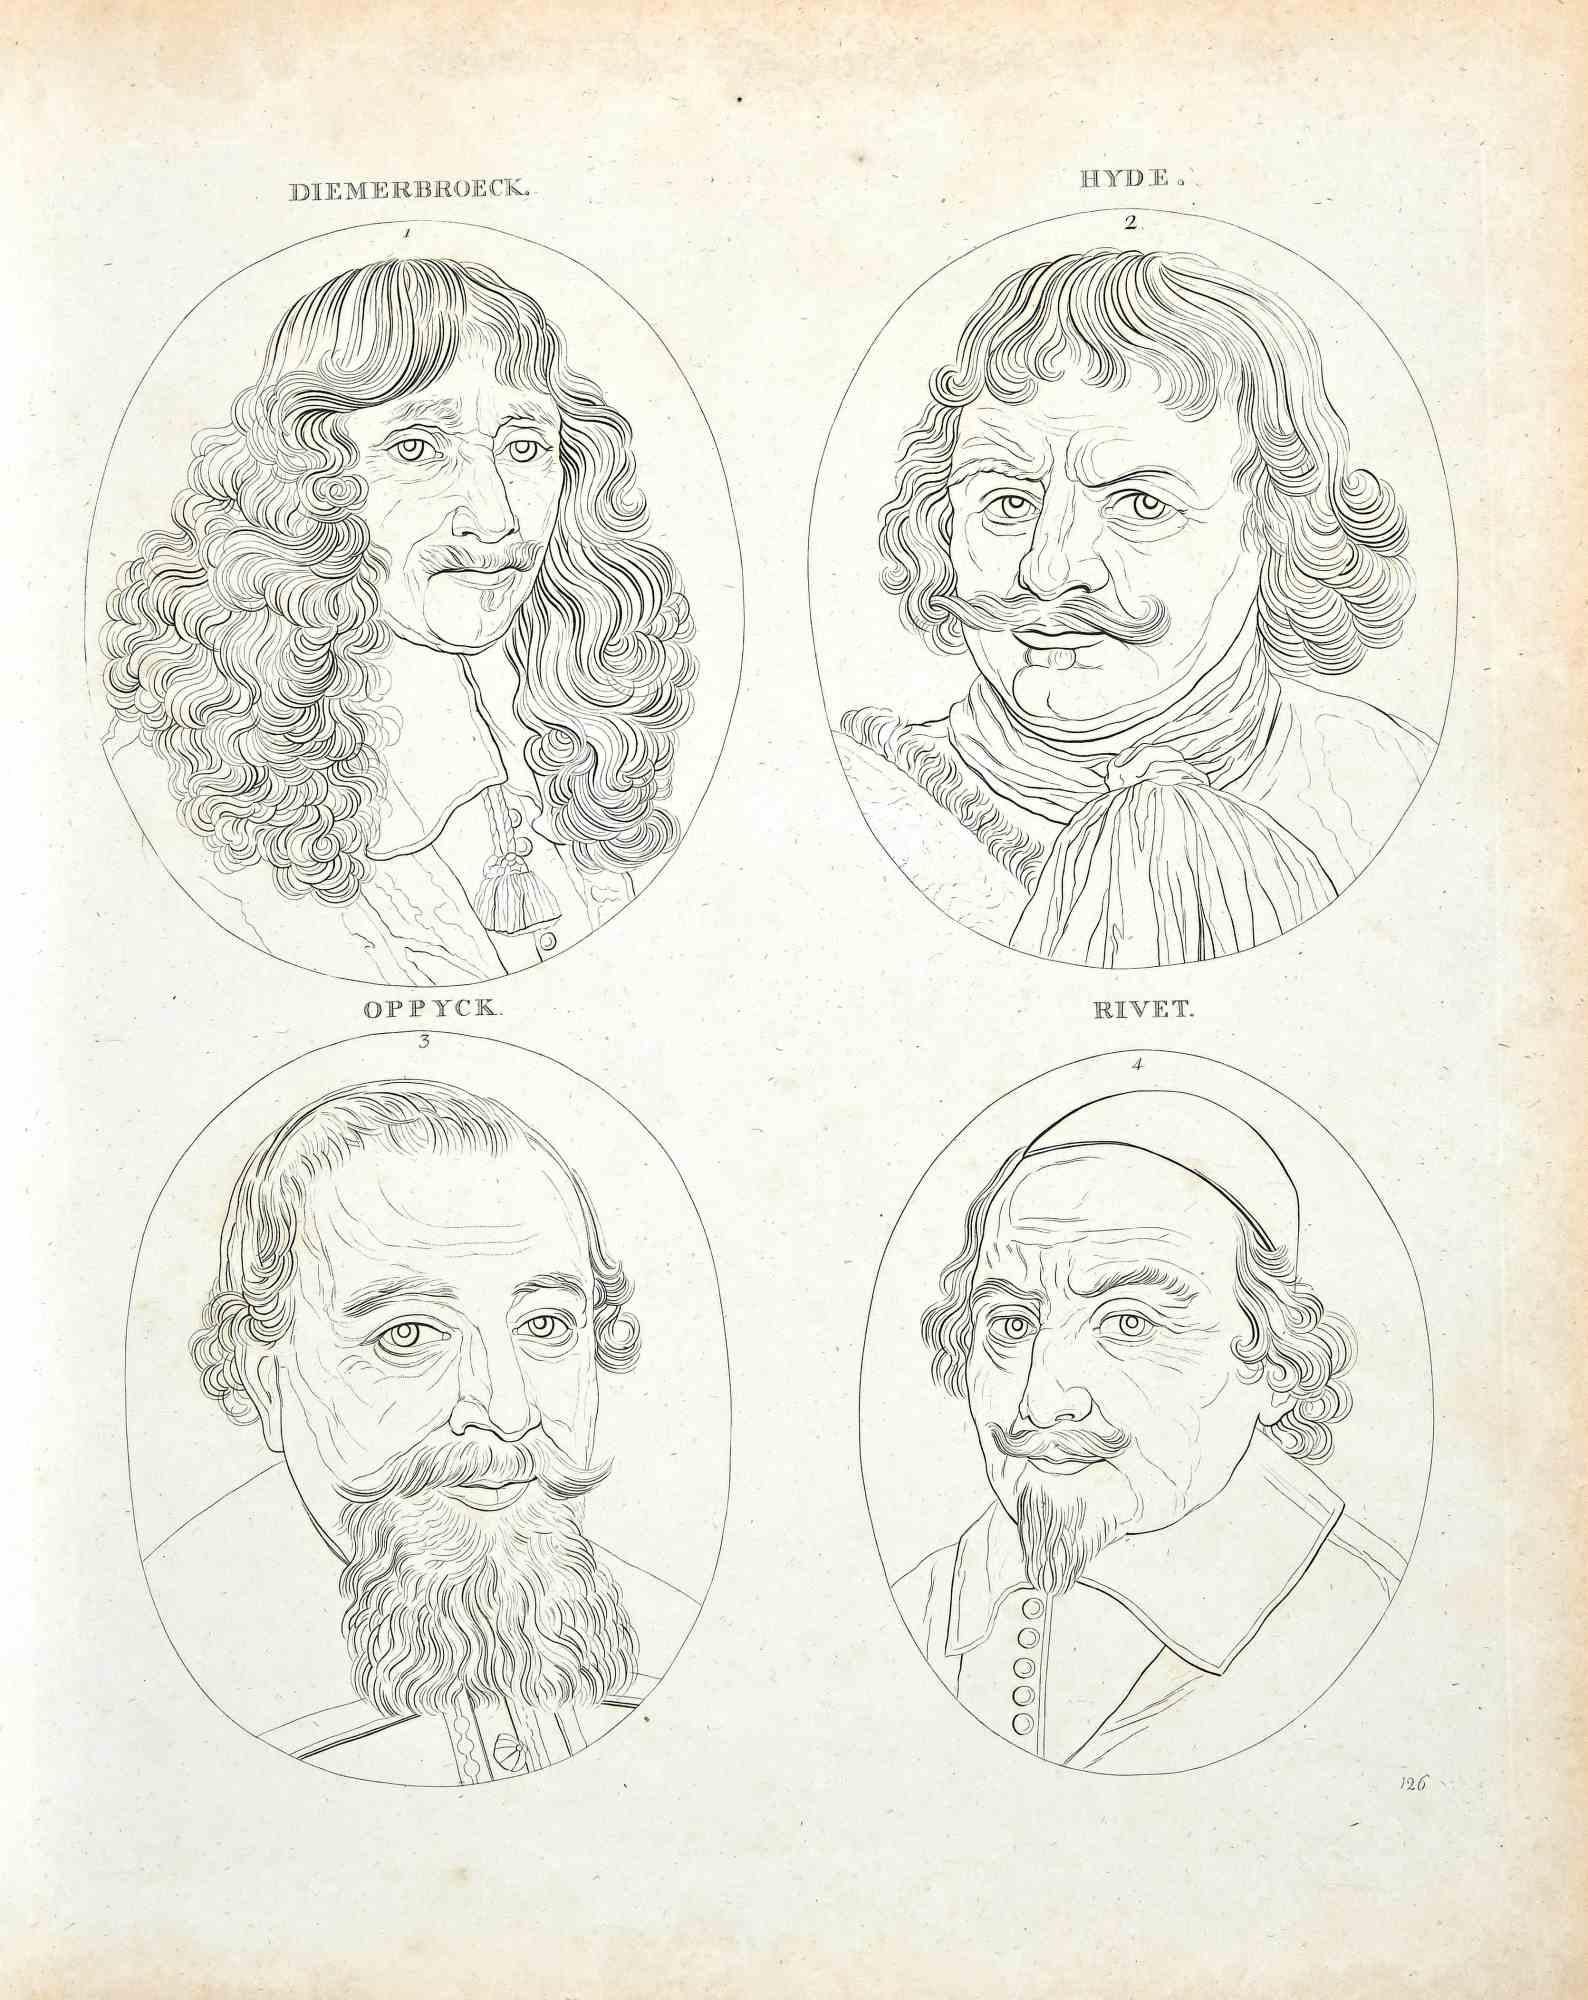 The Portraits of Masters is an original etching artwork realized by Thomas Holloway for Johann Caspar Lavater's "Essays on Physiognomy, Designed to Promote the Knowledge and the Love of Mankind", London, Bensley, 1810. 

Good conditions with some